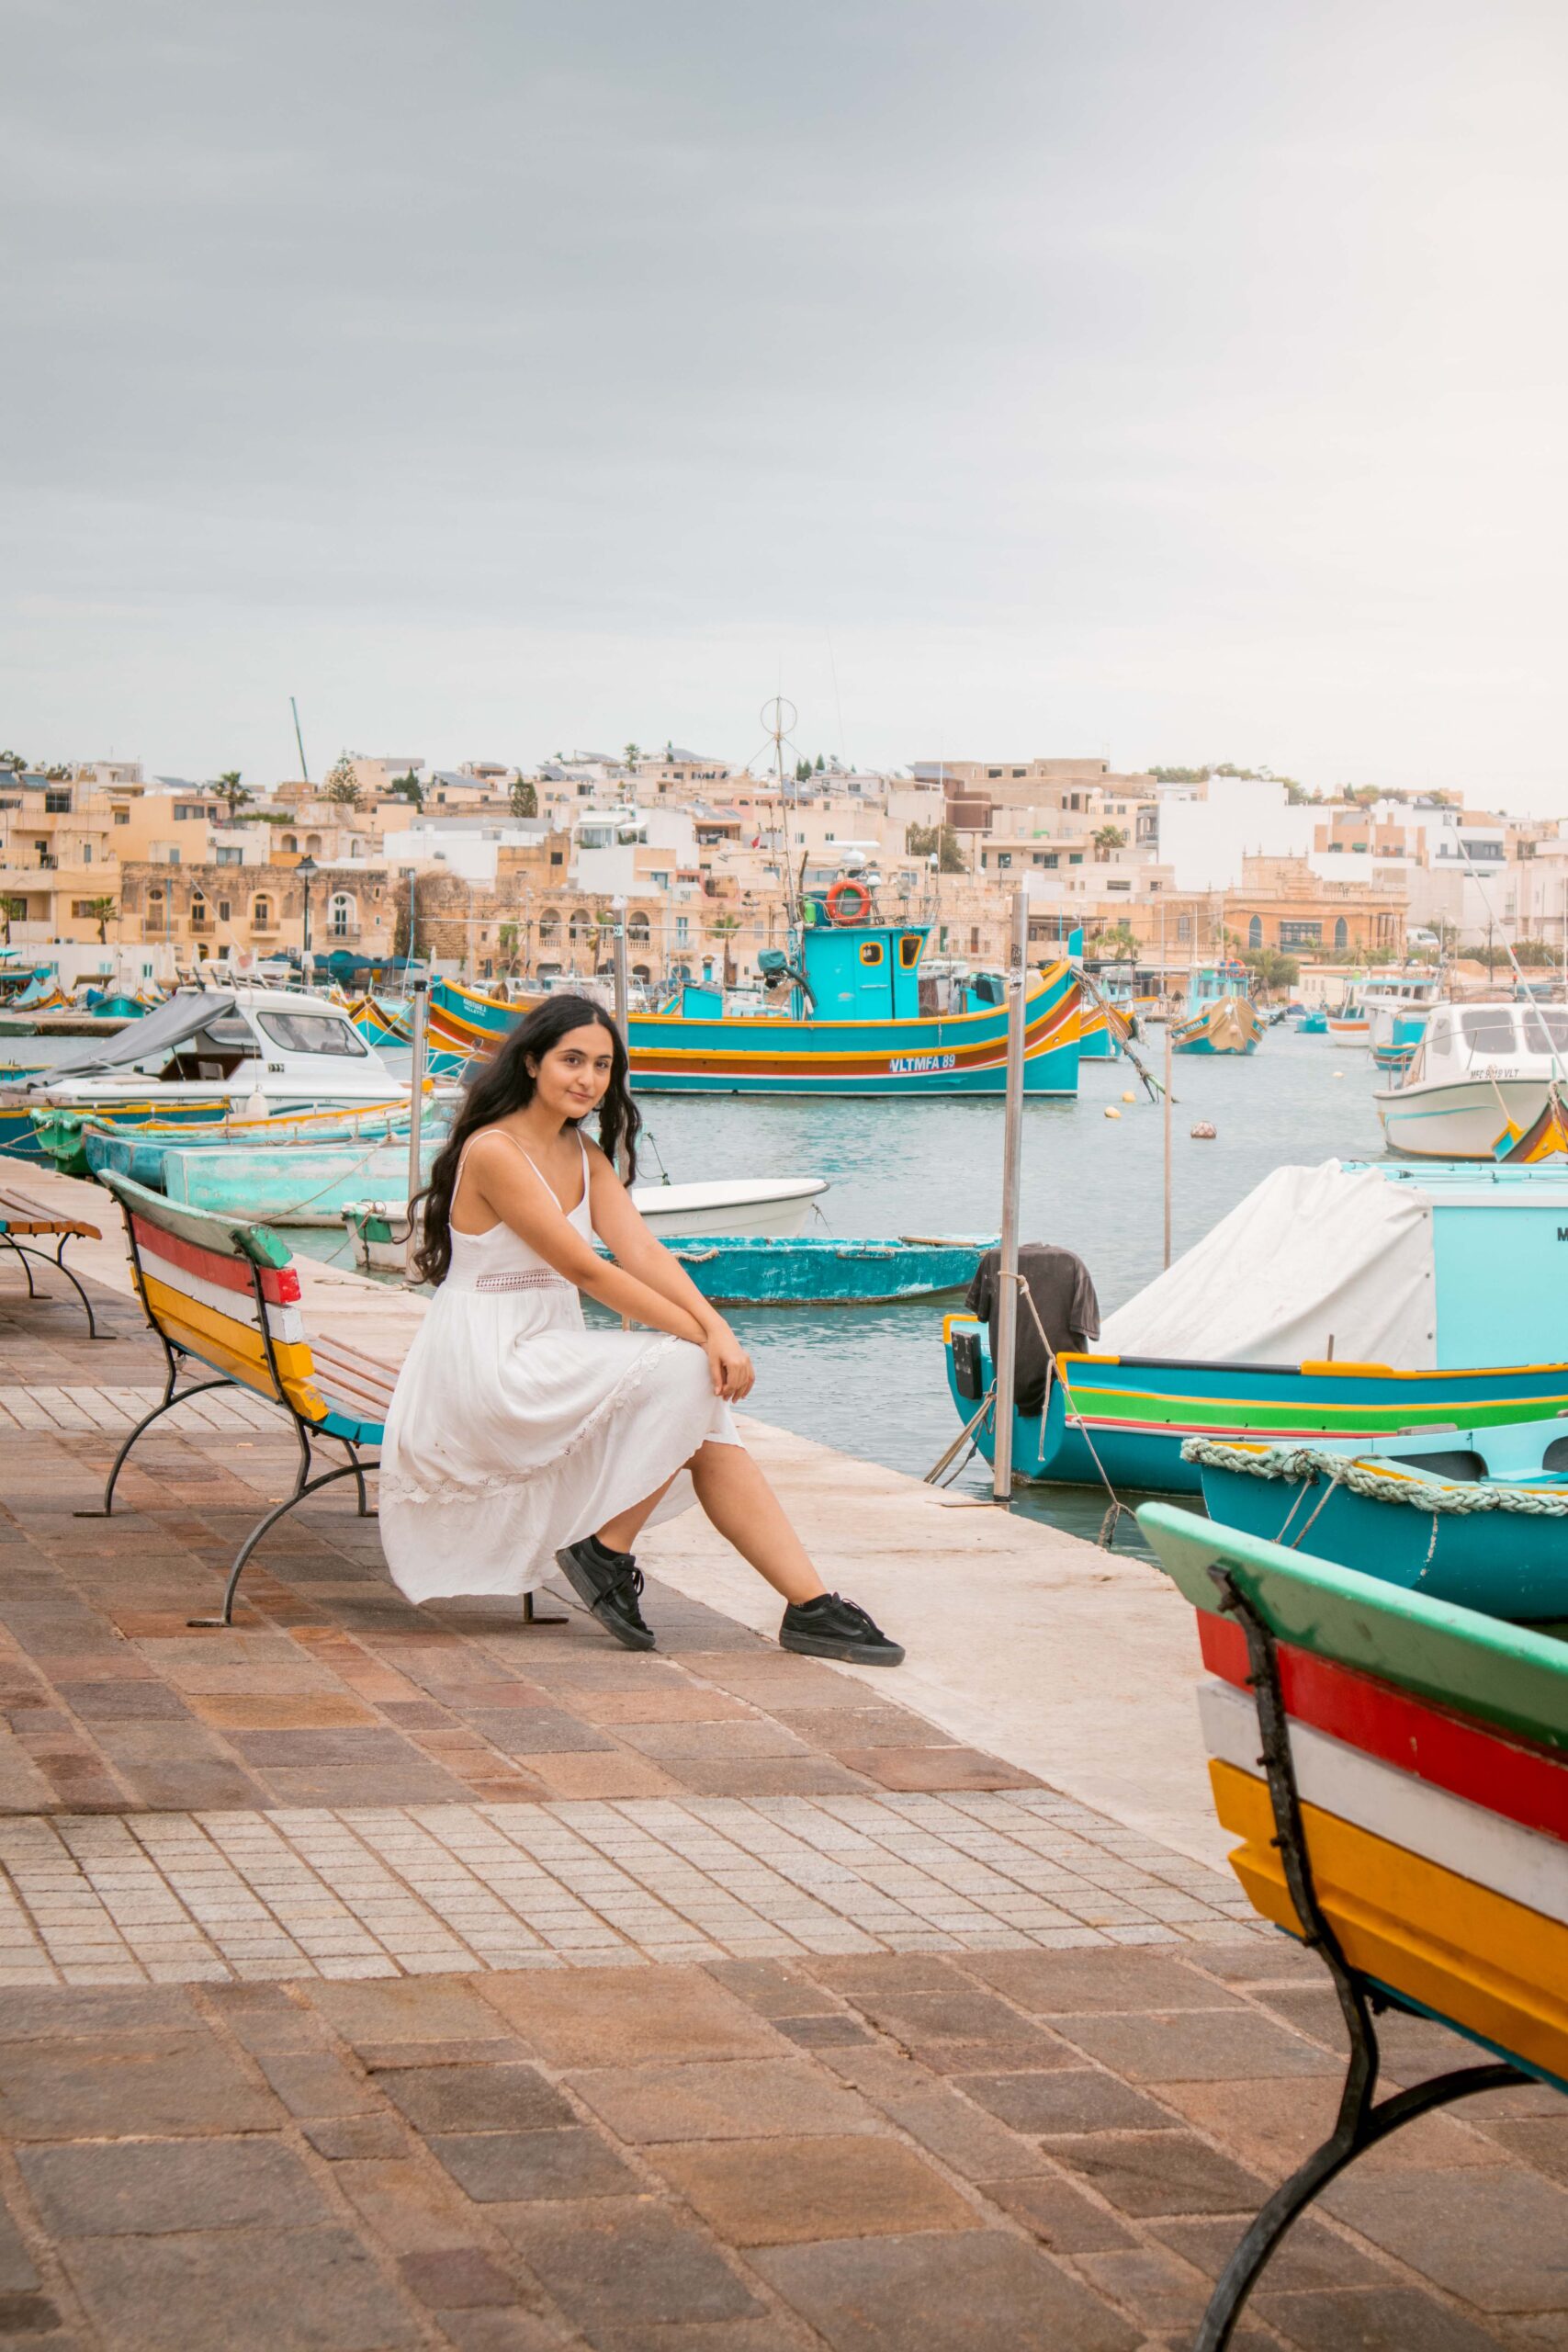 Woman wearing a white dress sitting on a colourful bench in Marsaxlokk Harbour, Malta